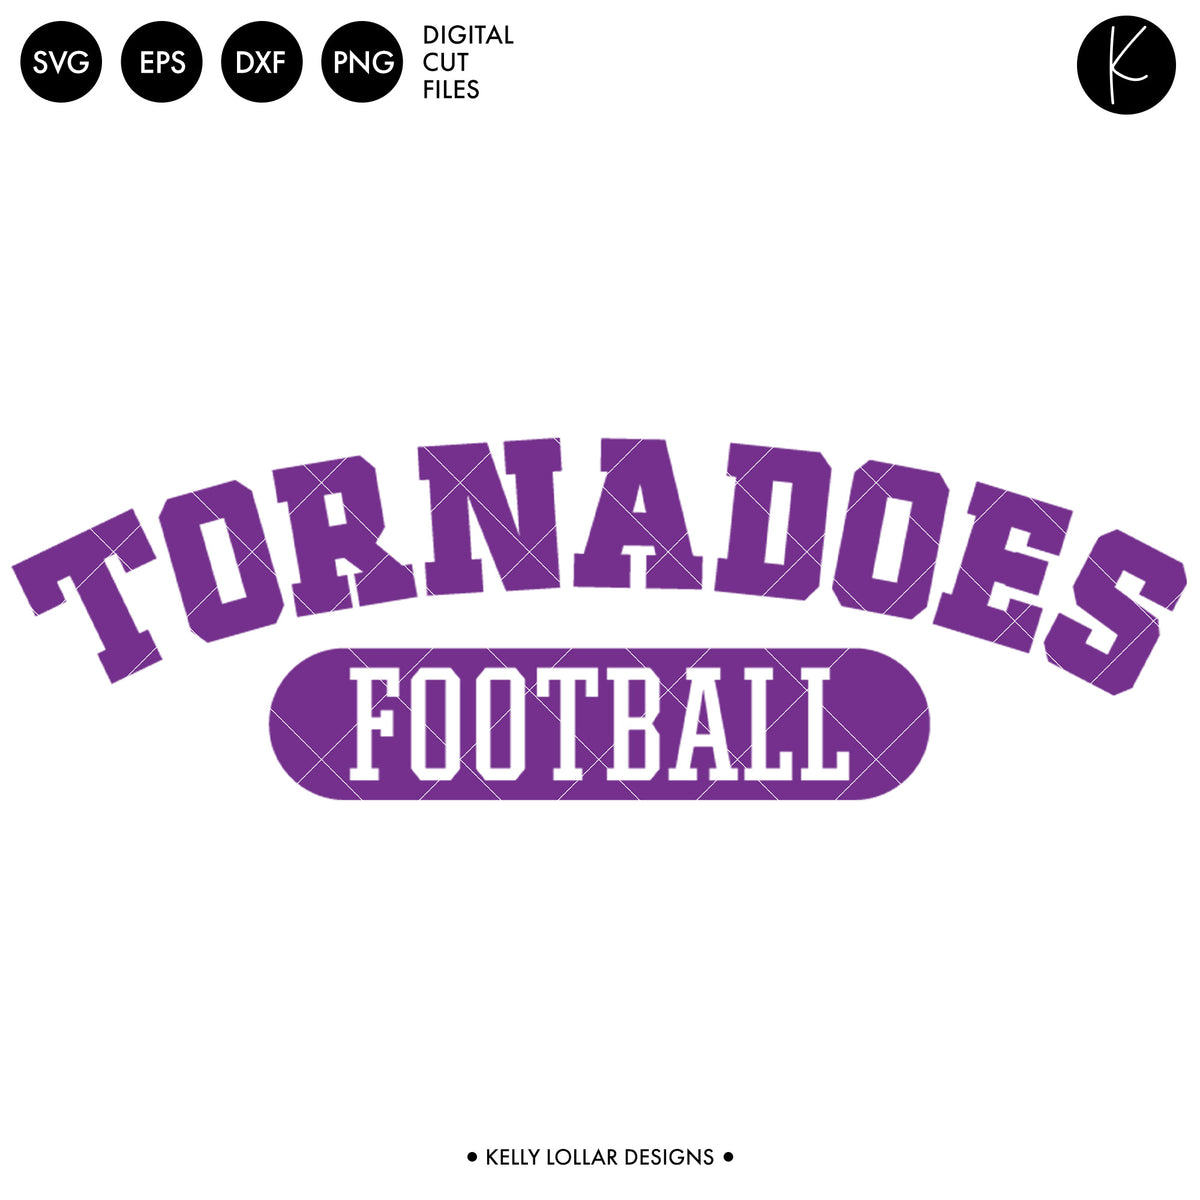 Tornadoes Soccer and Football Bundle | SVG DXF EPS PNG Cut Files